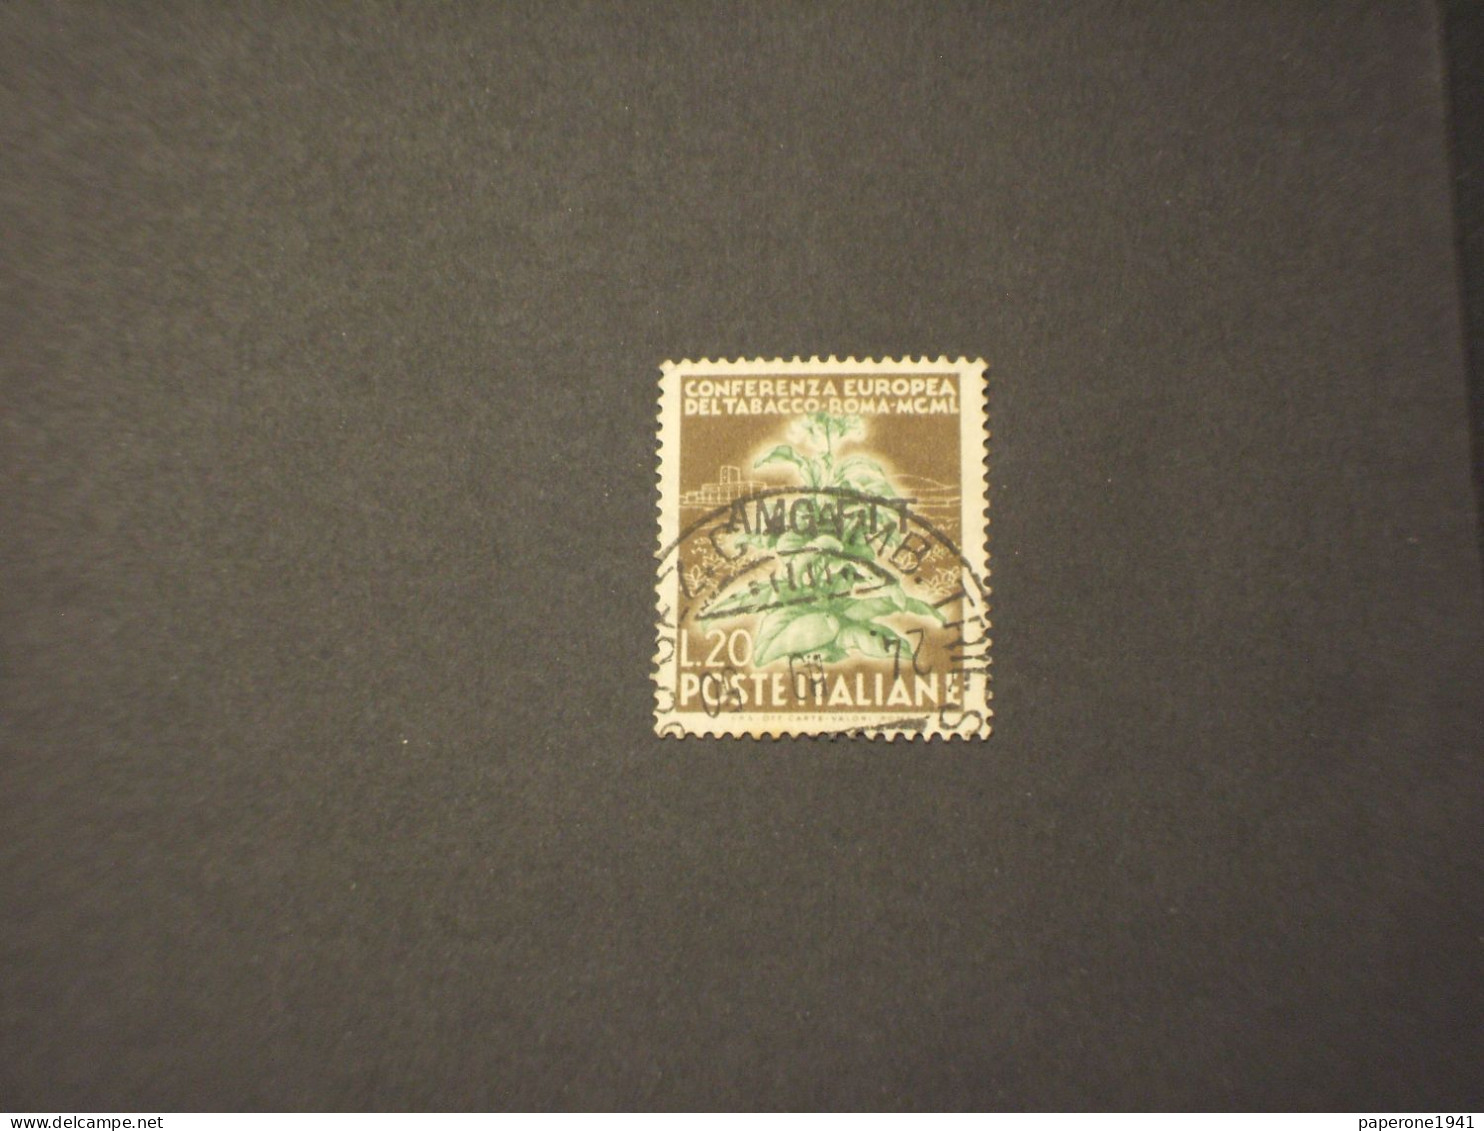 TRIESTE ZONA A-AMG-FTT - 1950 TABACCO L. 20 - TIMBRATO/USED - Gebraucht